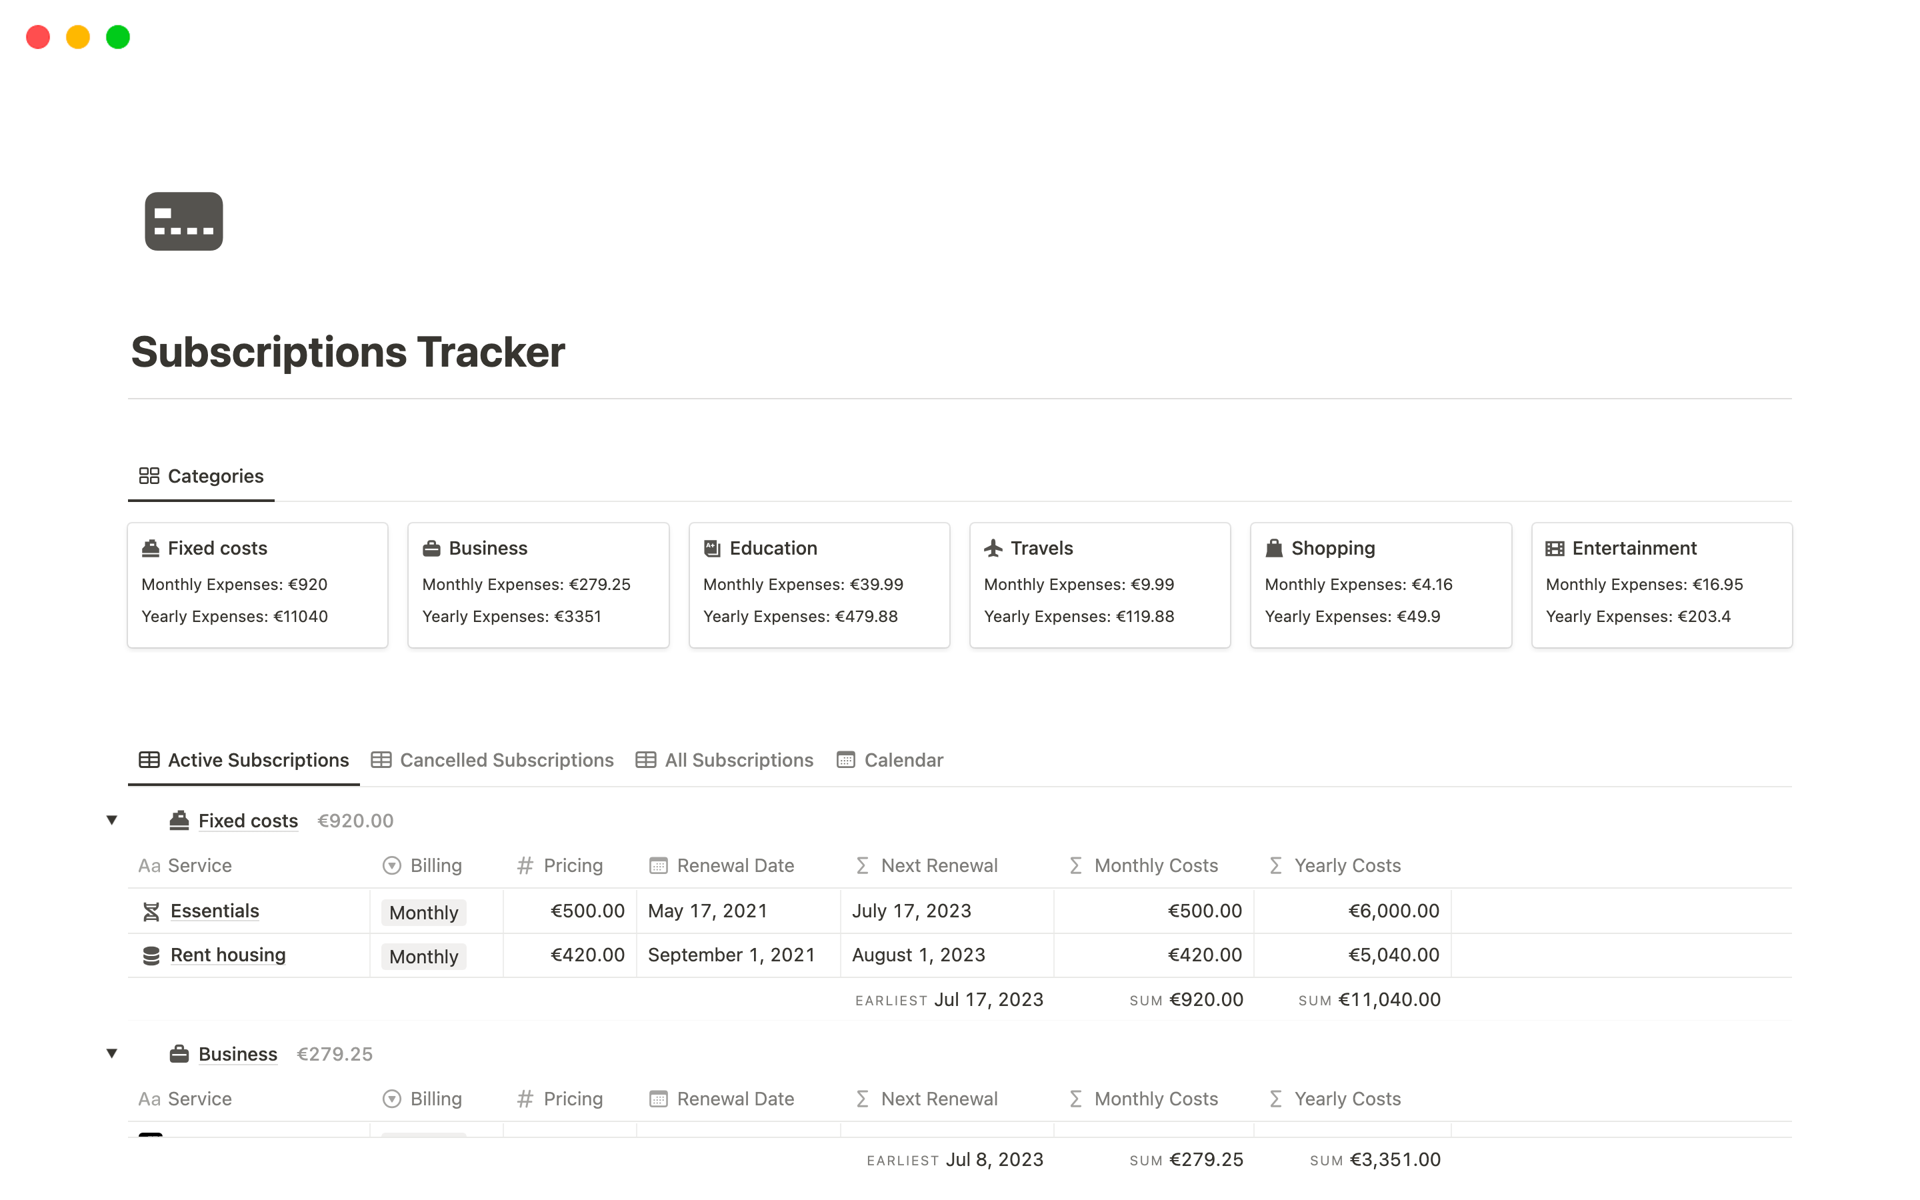 The ultimate subscriptions tracker template!